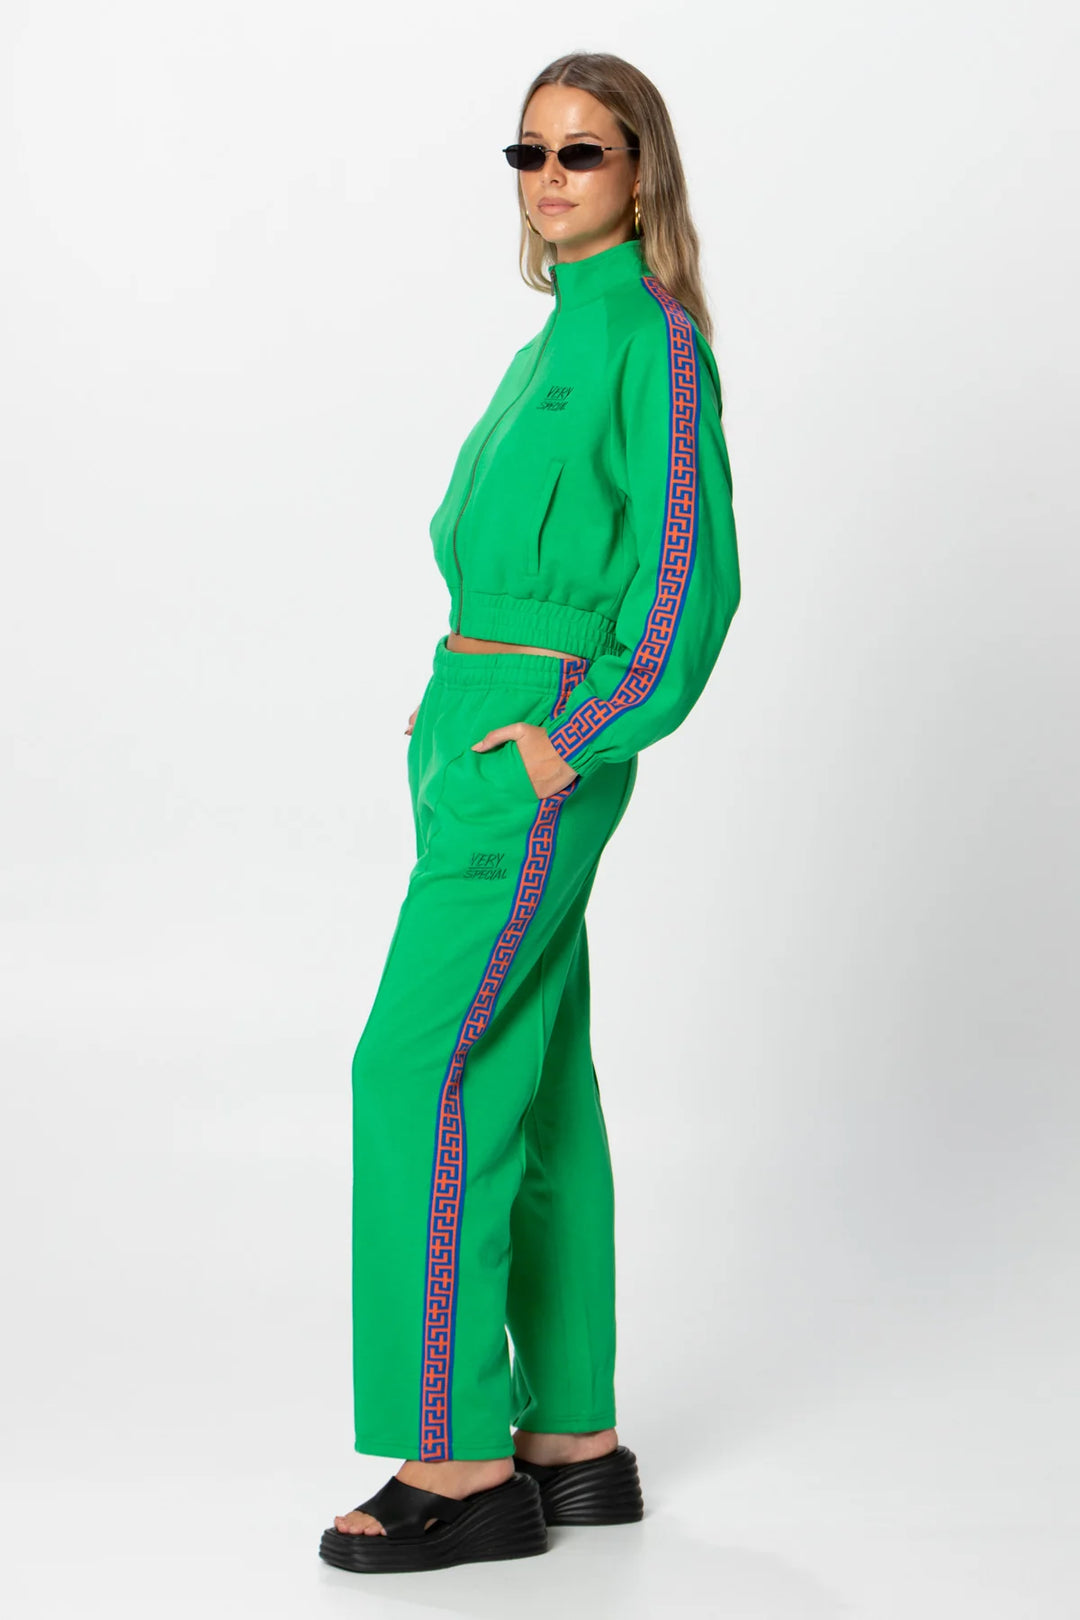 Something Very Special - Geo Track Pants 2.0 - Green